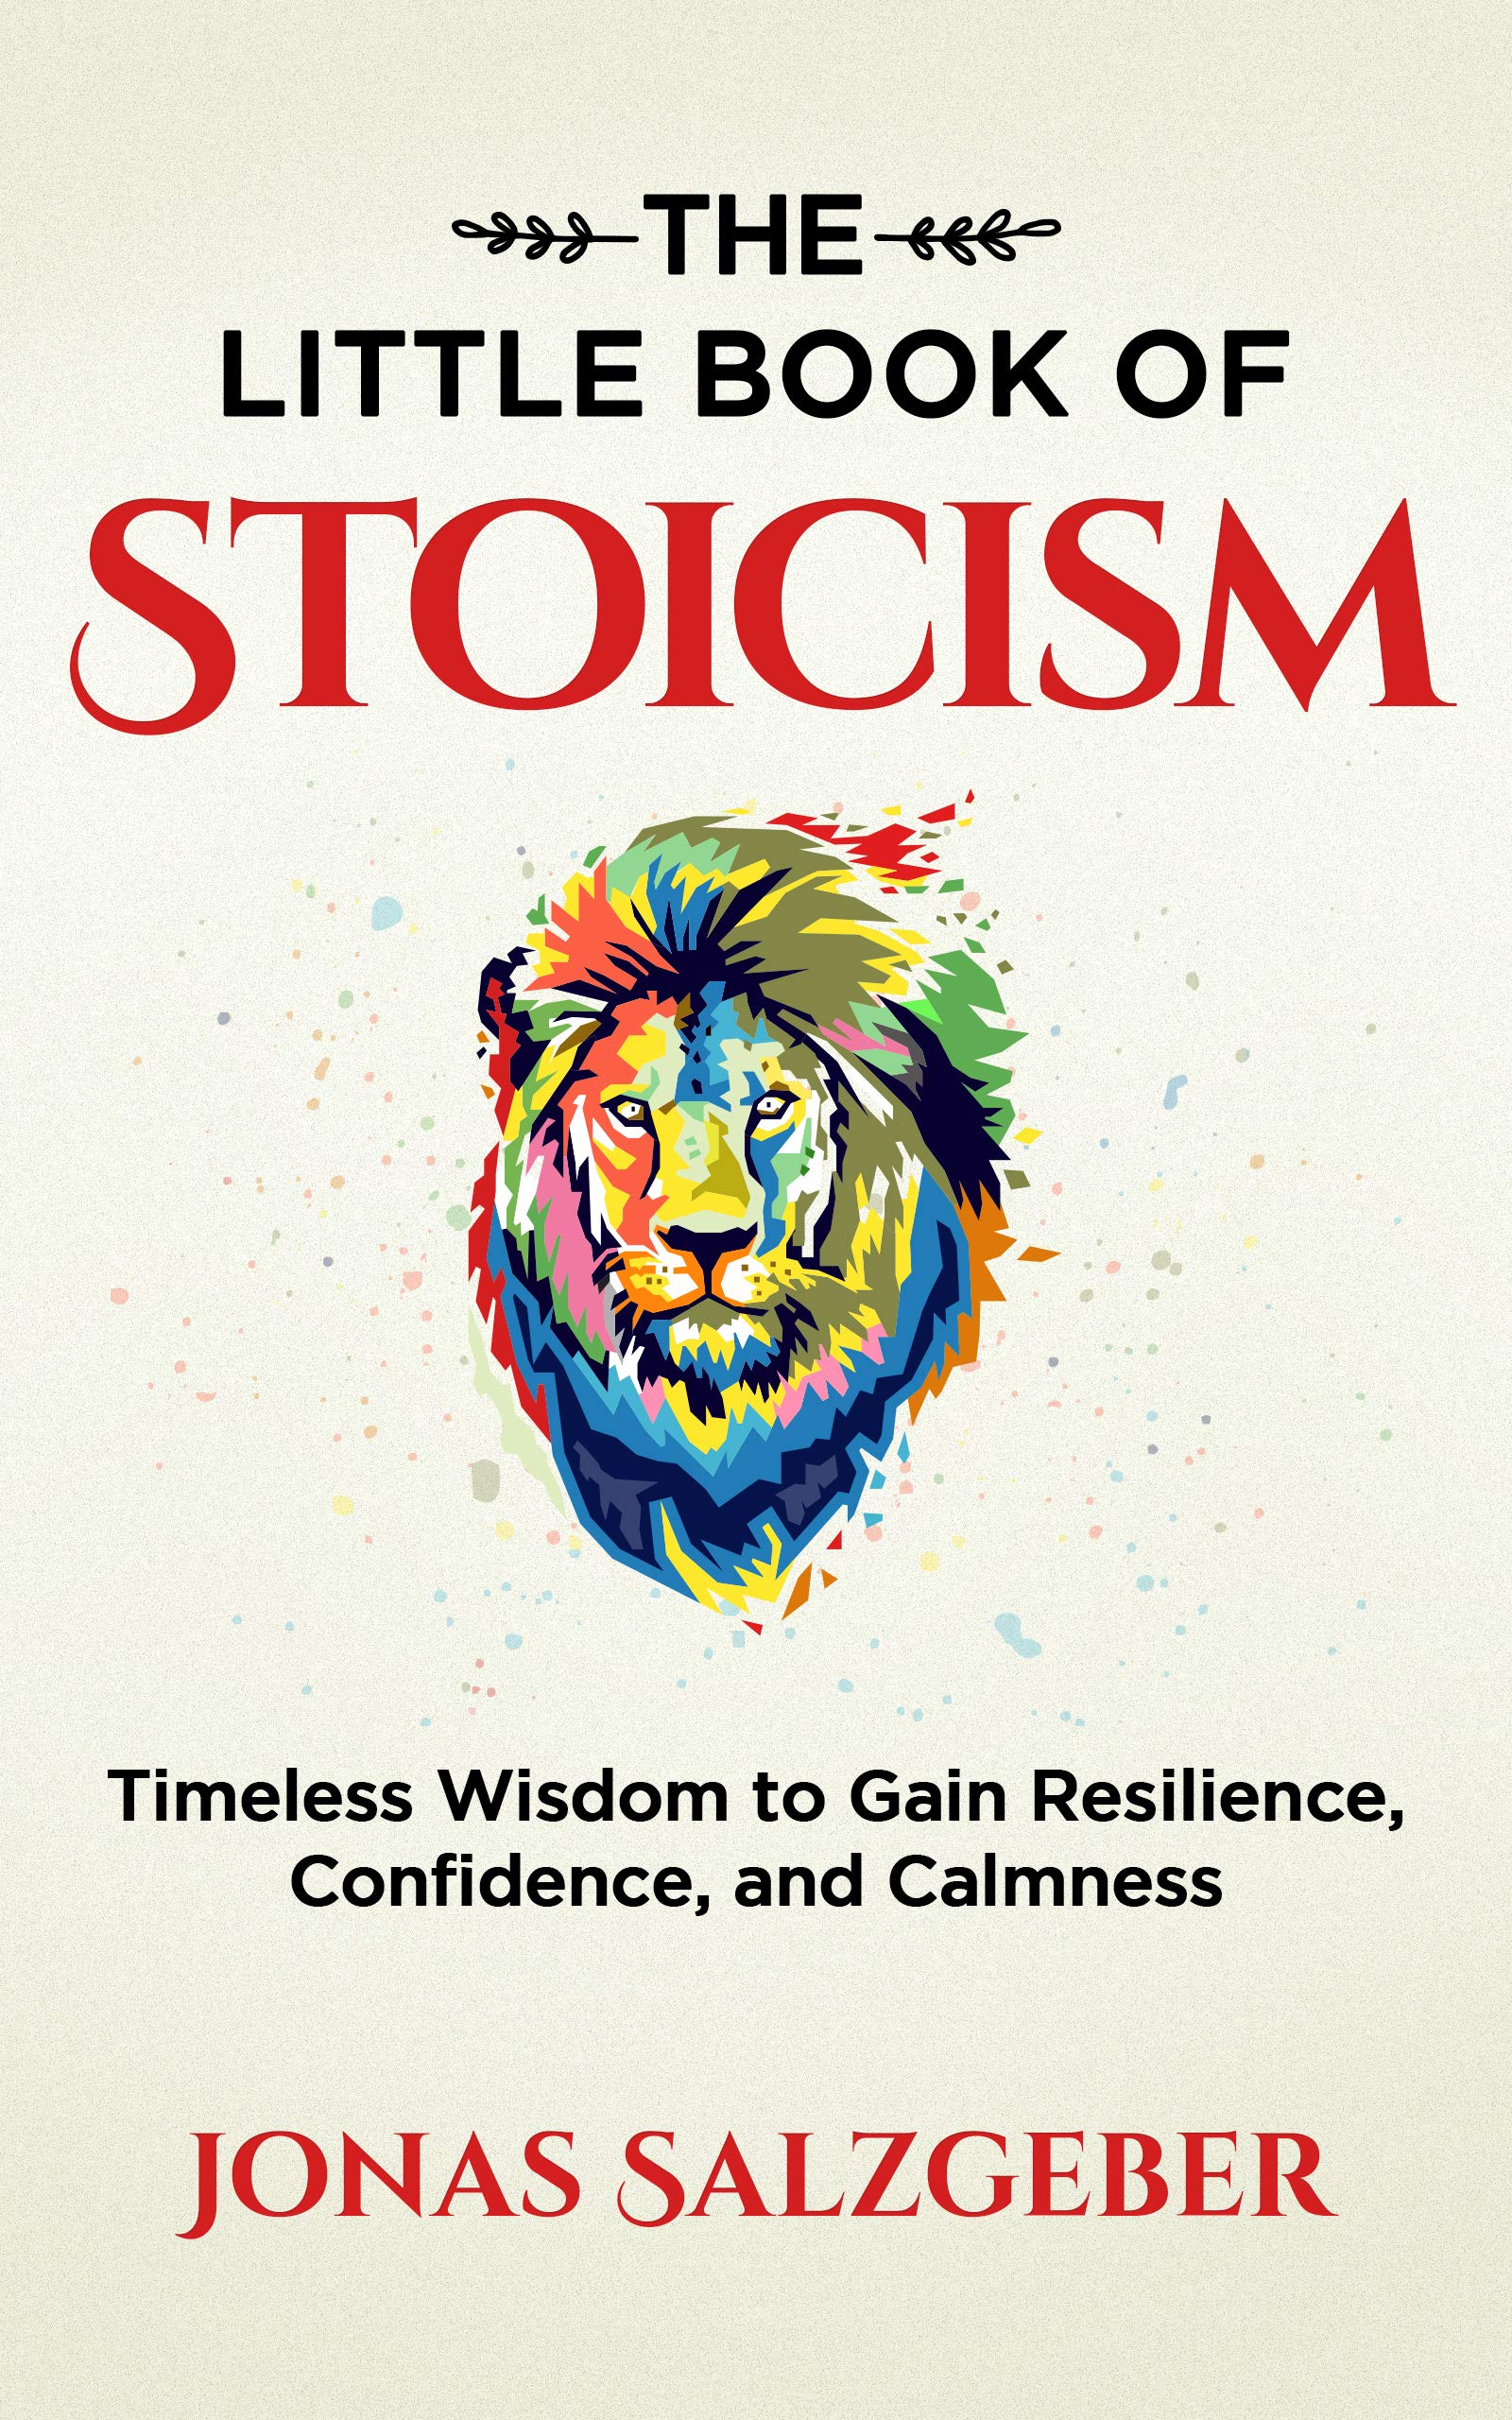 The Little Book of Stoicism: Timeless Wisdom to Gain Resilience, Confidence, and Calmness (eBook) by Jonas Salzgeber $0.99